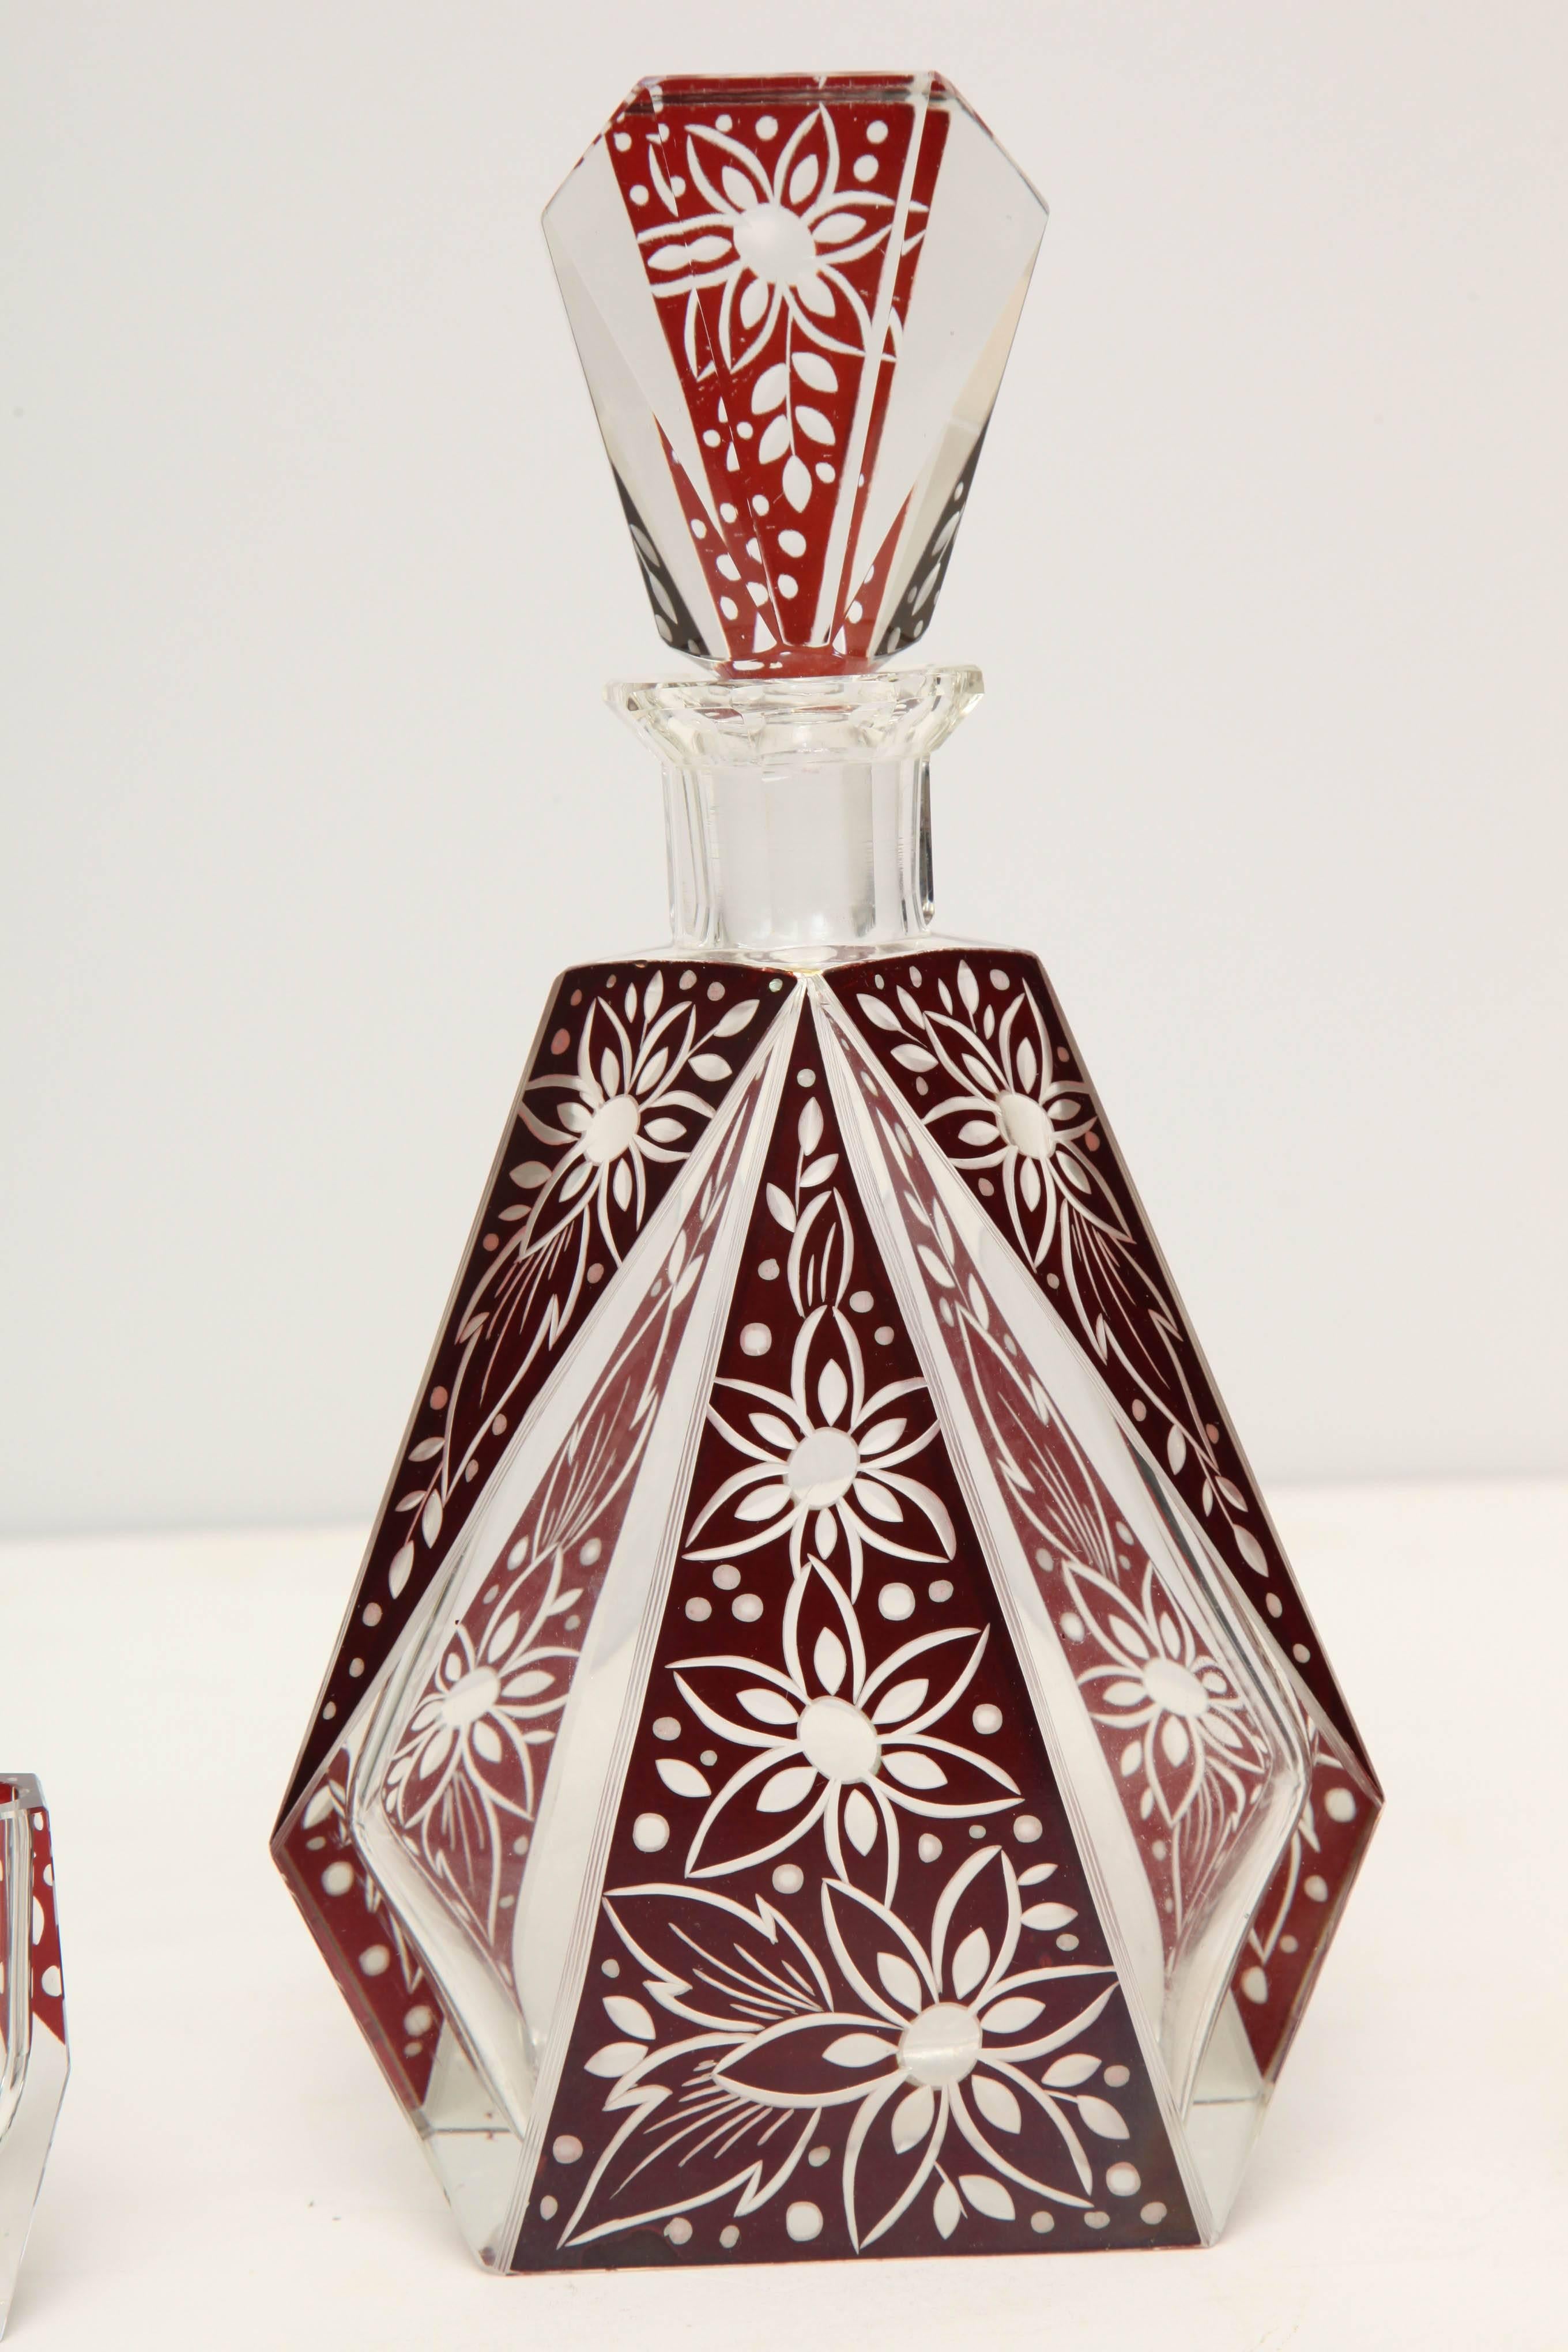 Bohemian clear and cranberry stylized cut-glass.
Decanter is 5.5